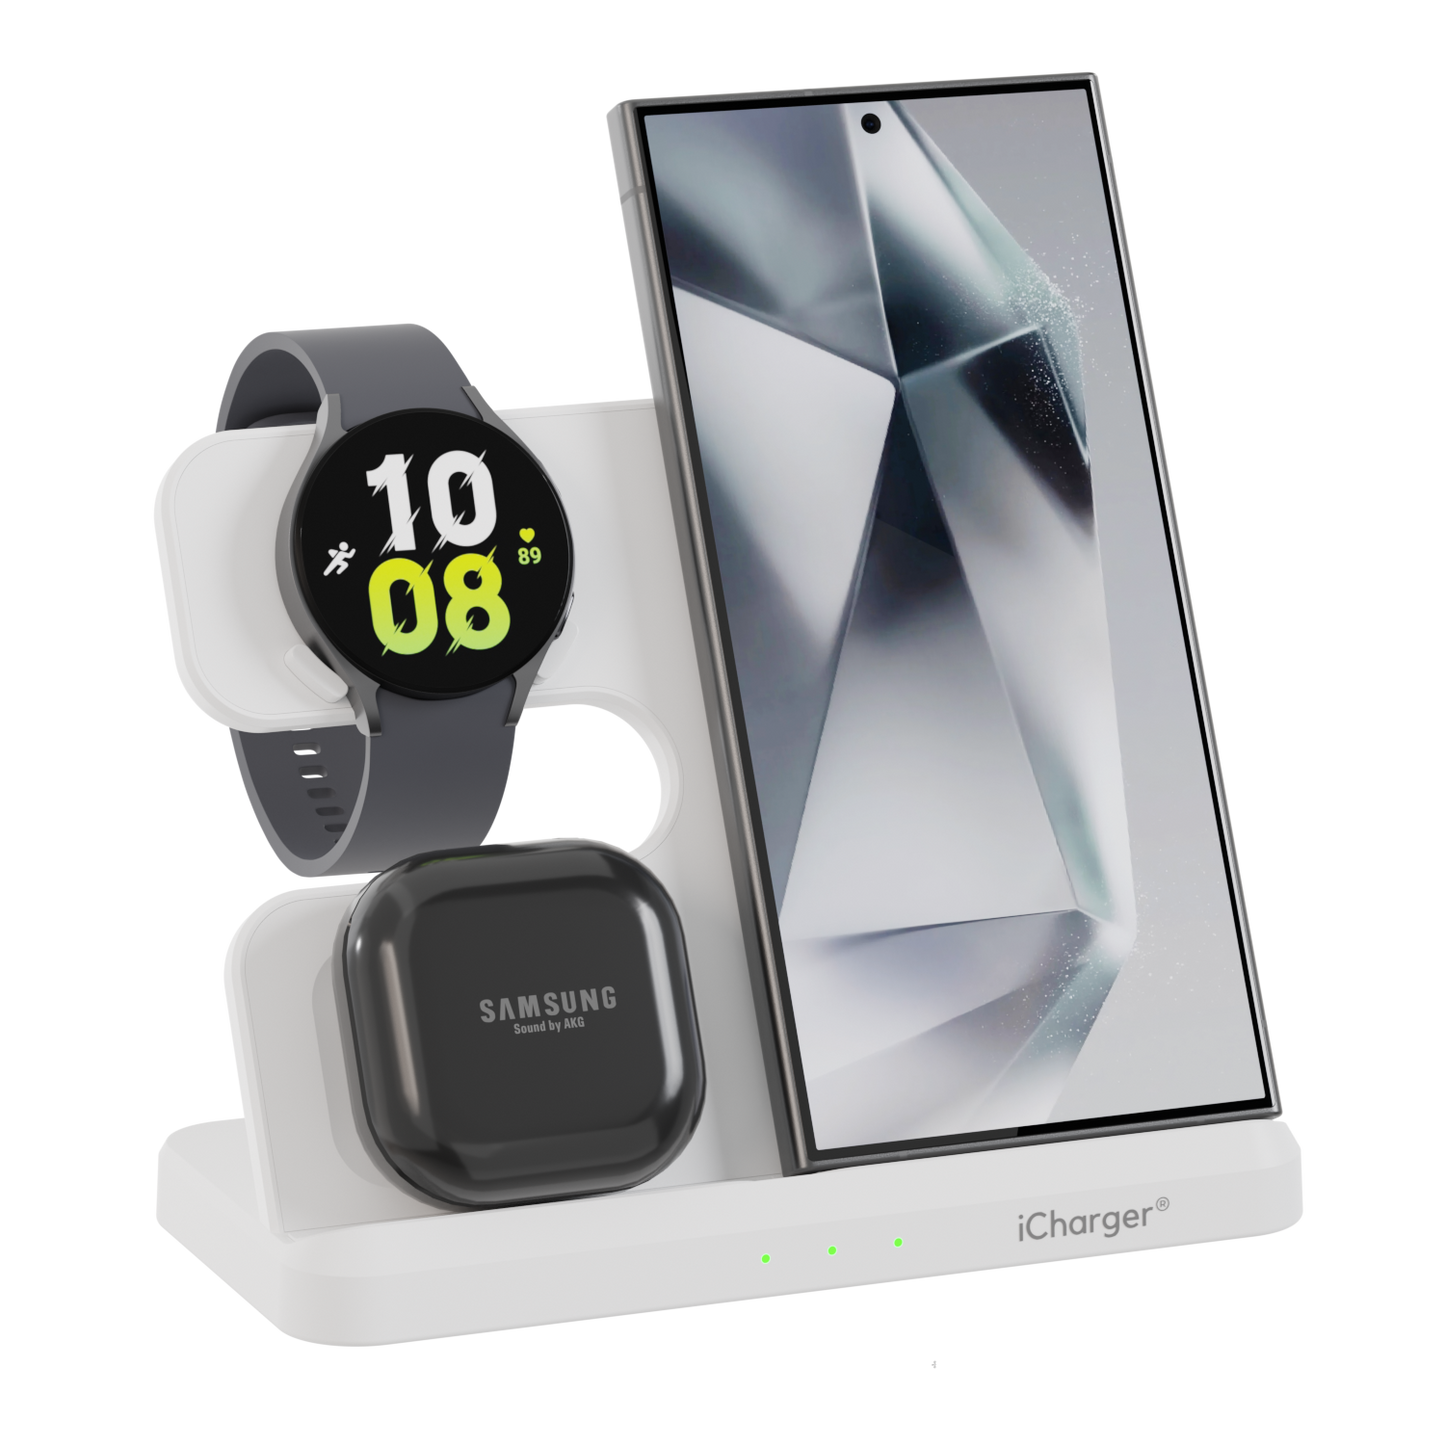 White iCharger Samsungs edition 3-in-1 Qi wireless charging station with a Samsung smartphone and smartwatch, elegant charging solution